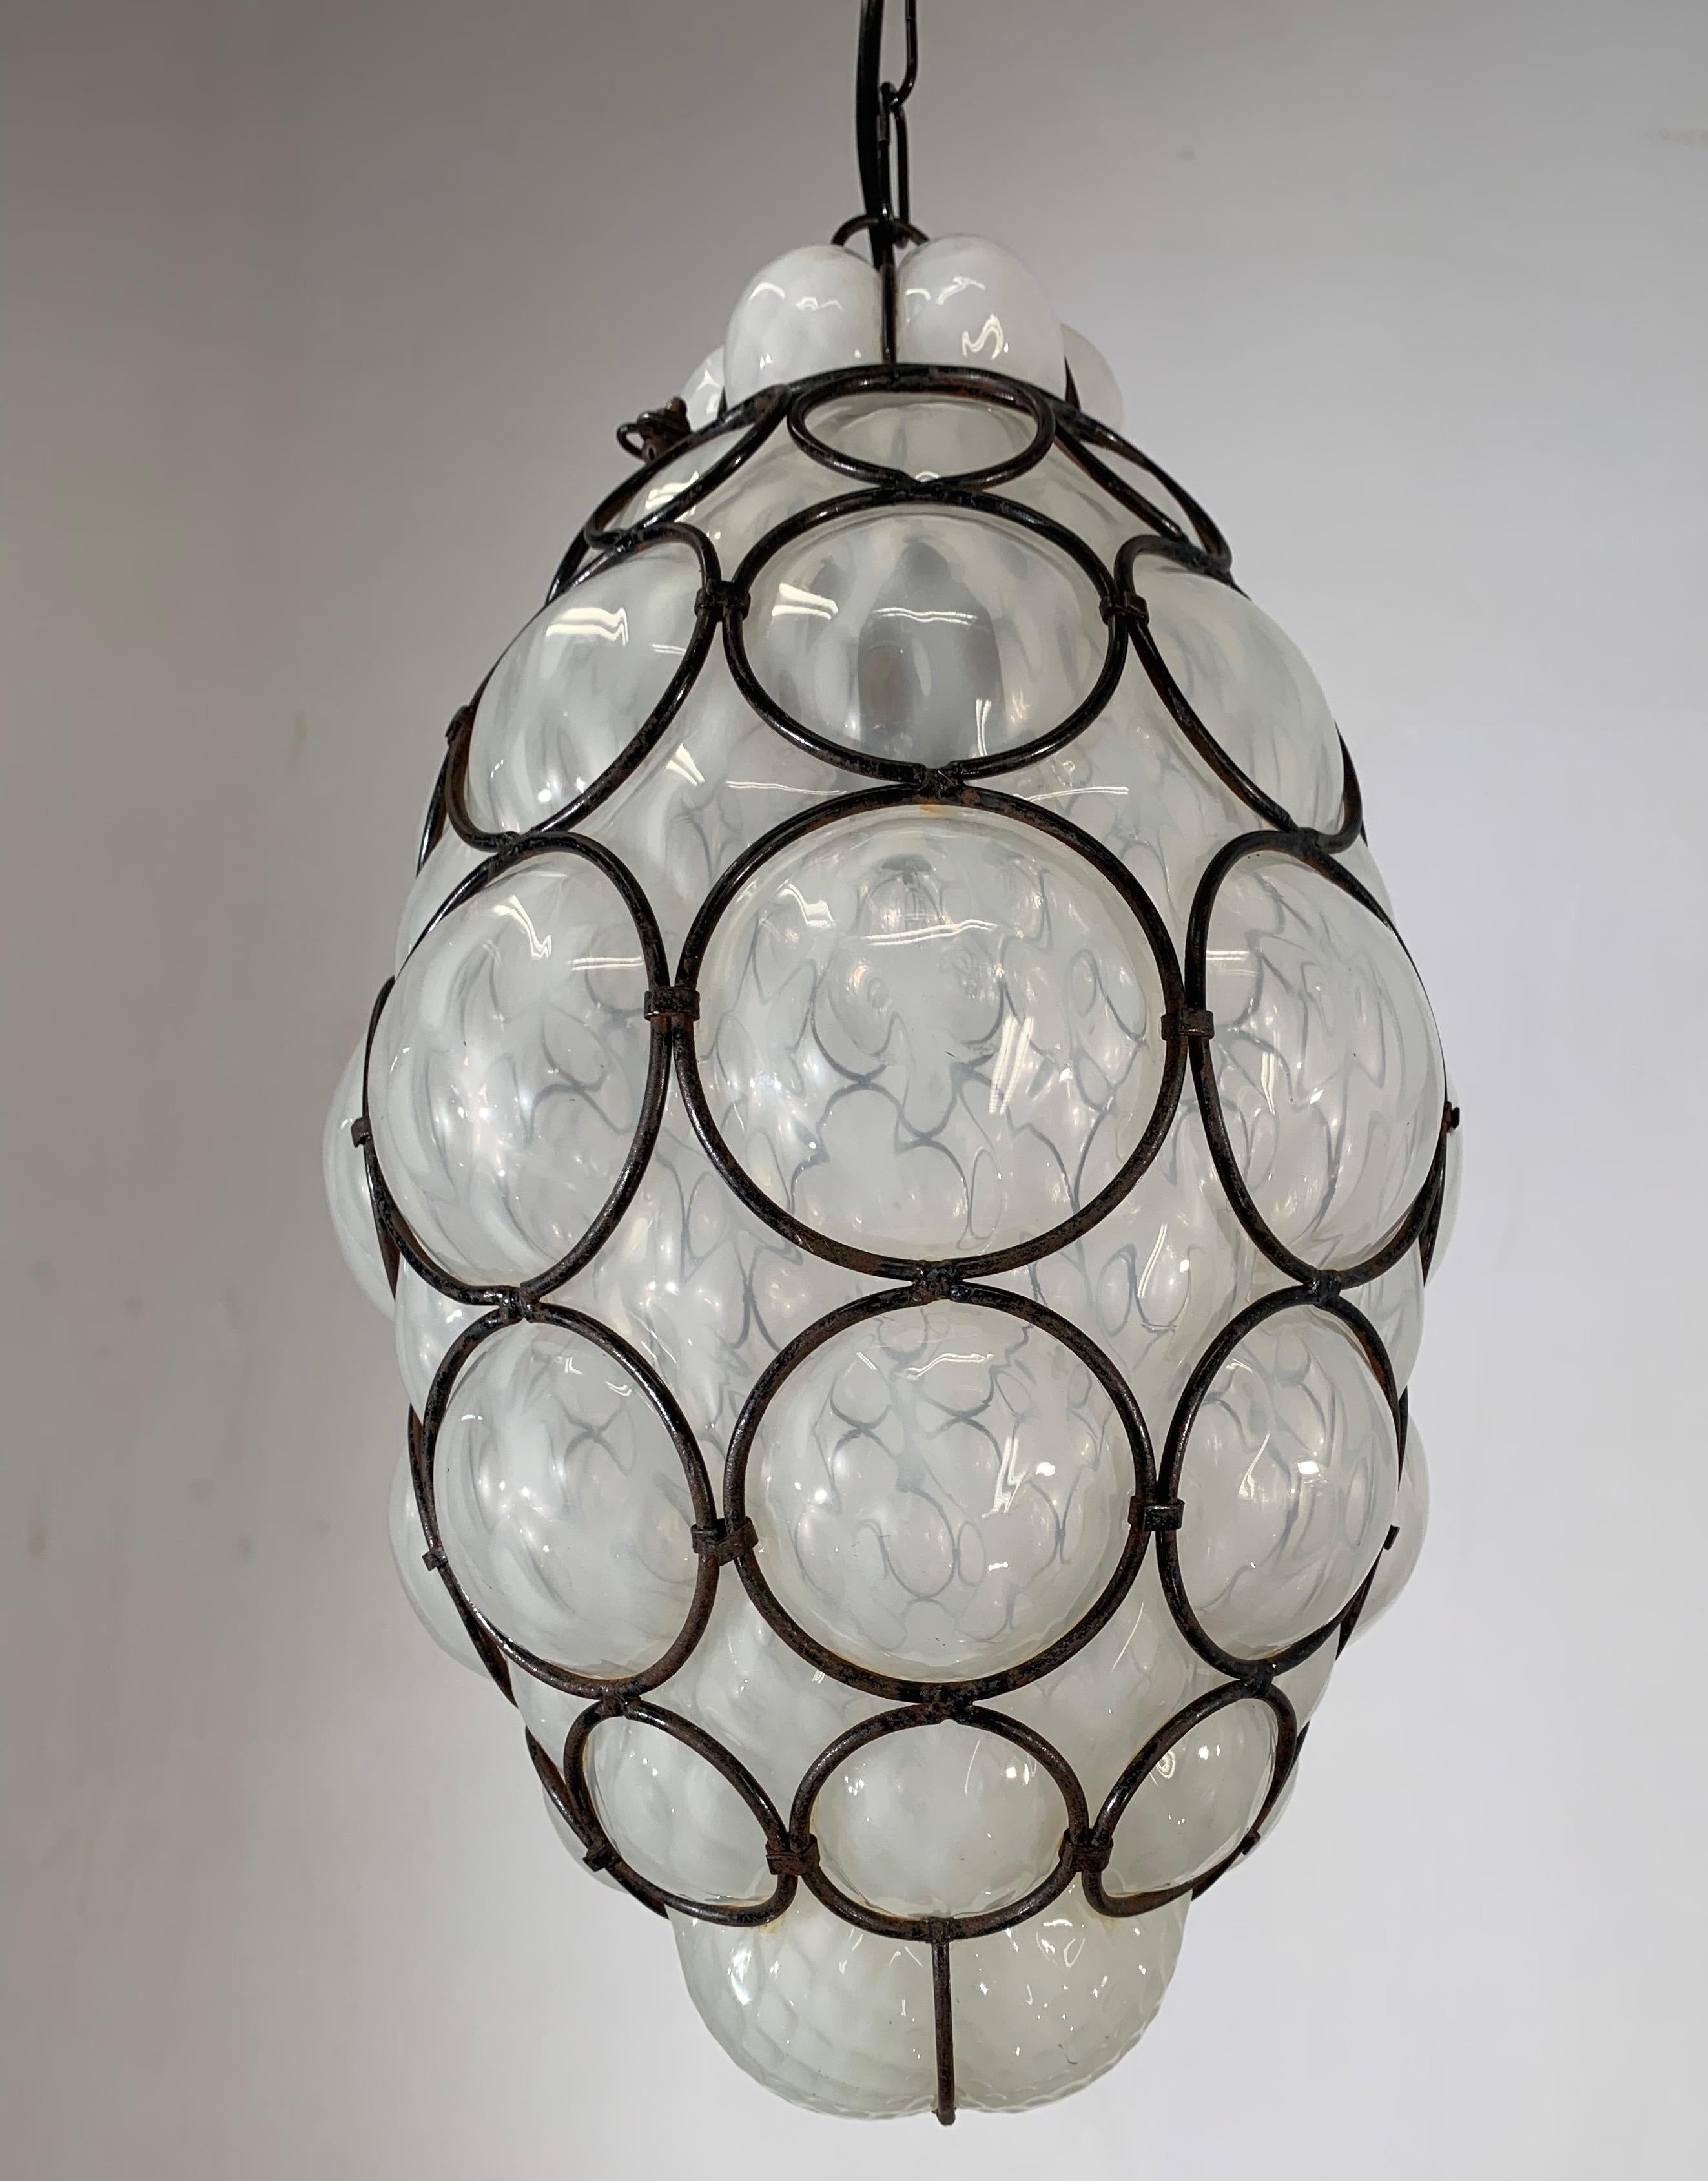 Early 20th century, Italian craftsmanship pendant. 

This stylish single light pendant is beautiful in shape and the mouth blown, white/blue tinted glass is in excellent condition. The opalescent quality of this fixture combined with its